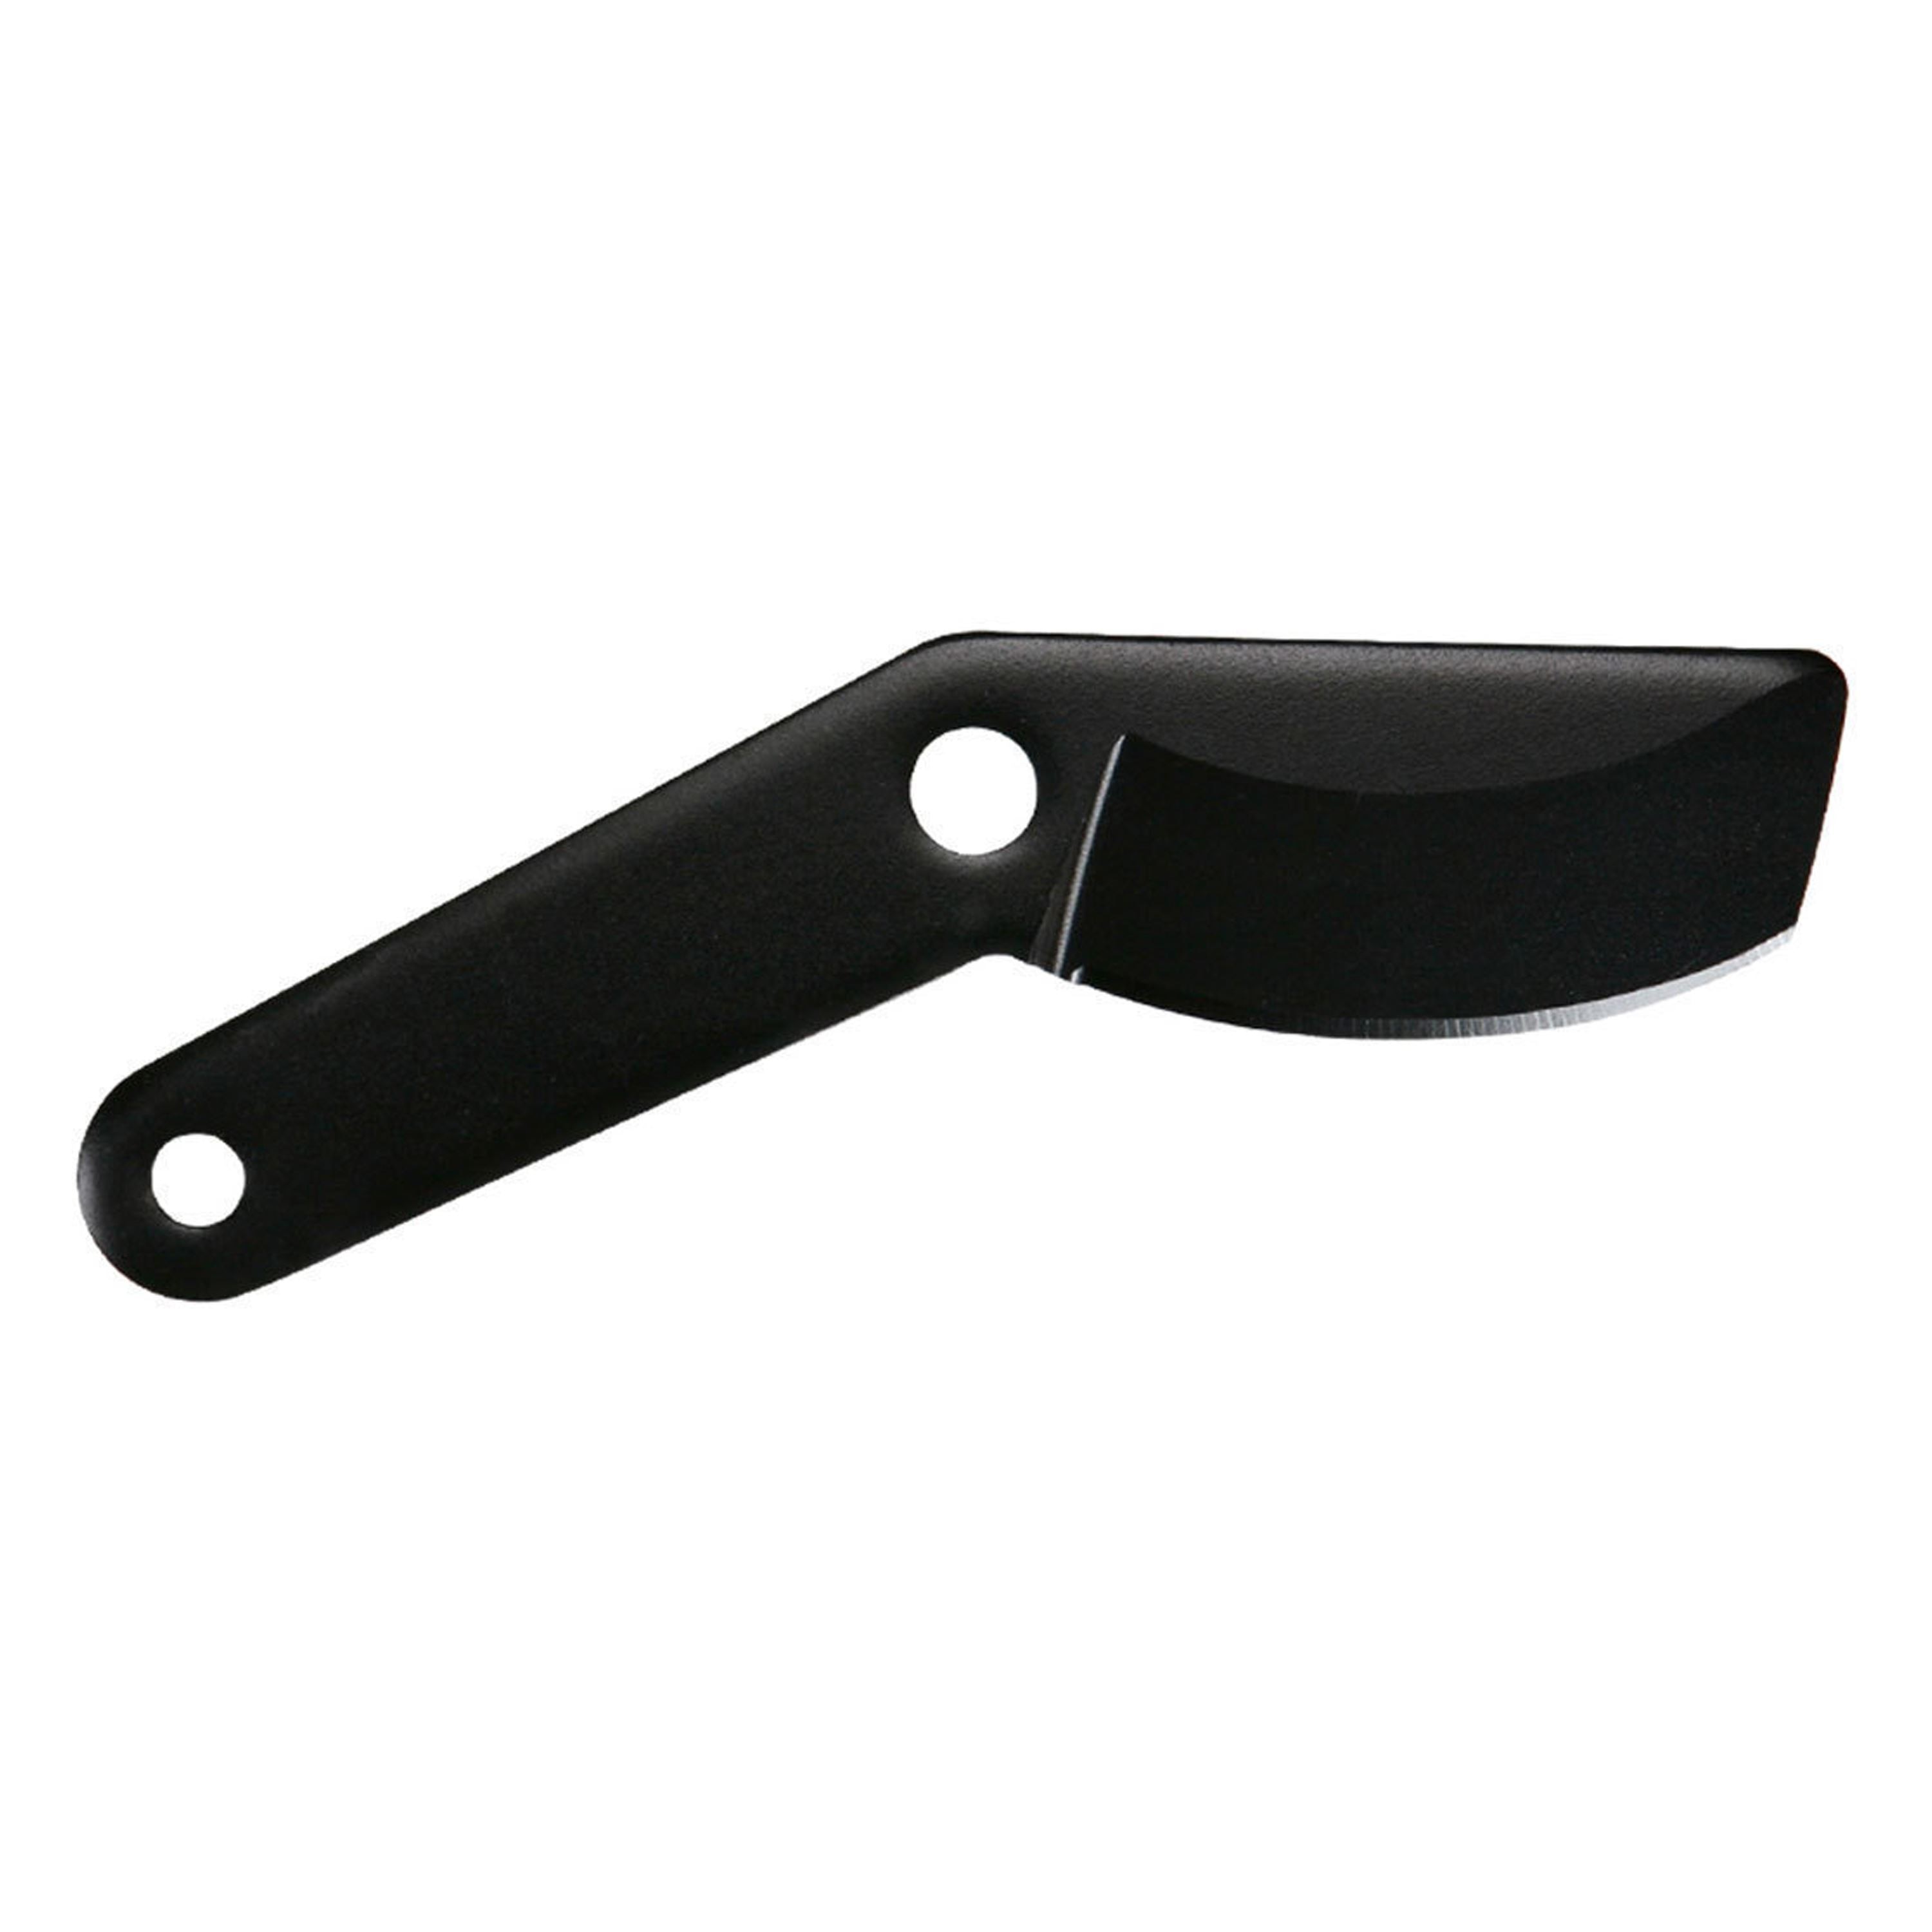 Fiskars Steel Replacement Blade For Forged Lopper 381561-1001 from Fiskars  - Acme Tools